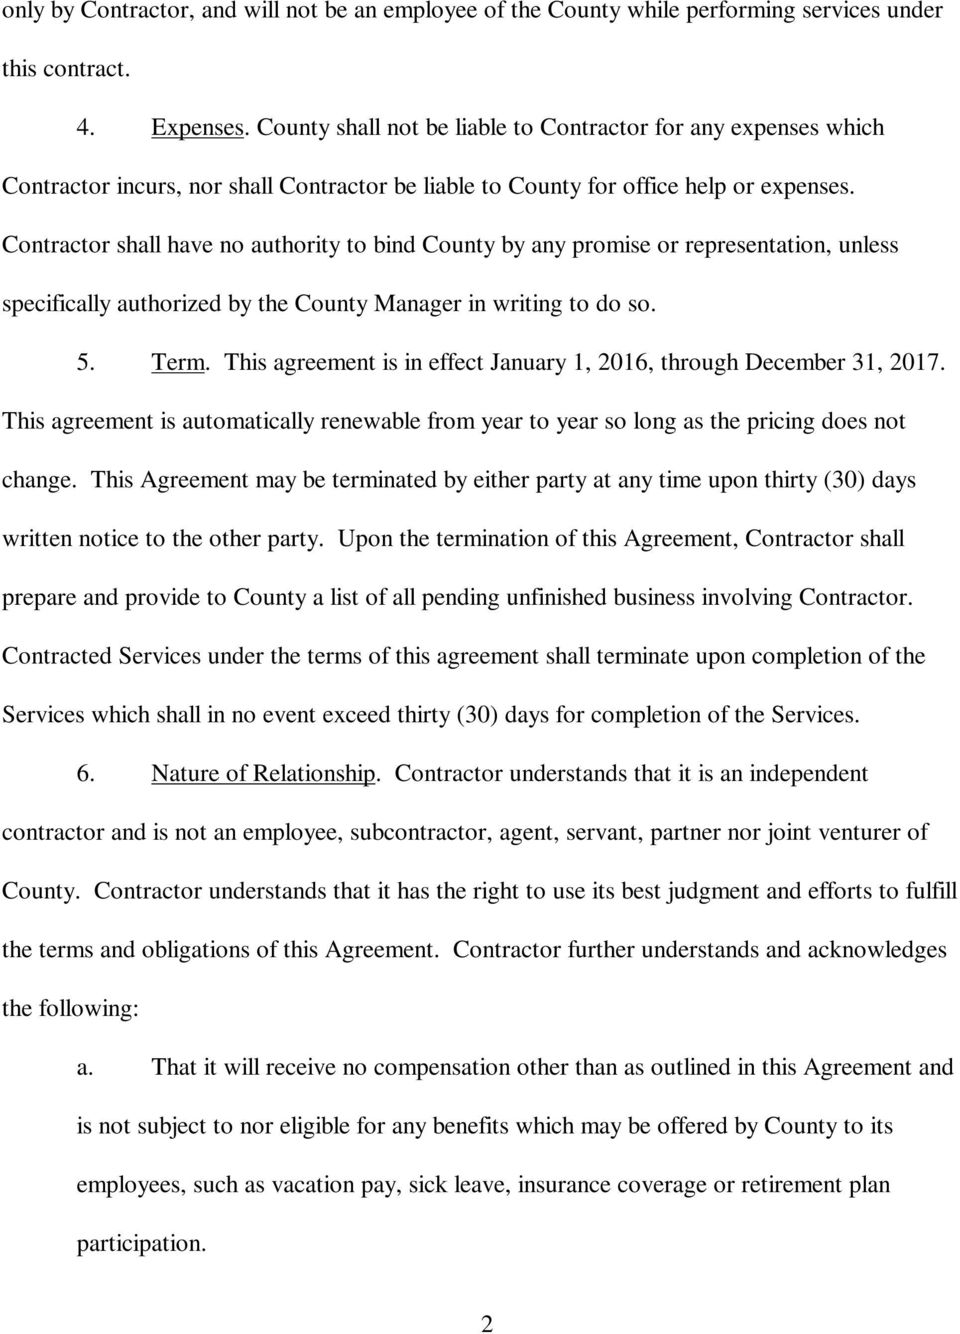 Contractor shall have no authority to bind County by any promise or representation, unless specifically authorized by the County Manager in writing to do so. 5. Term.